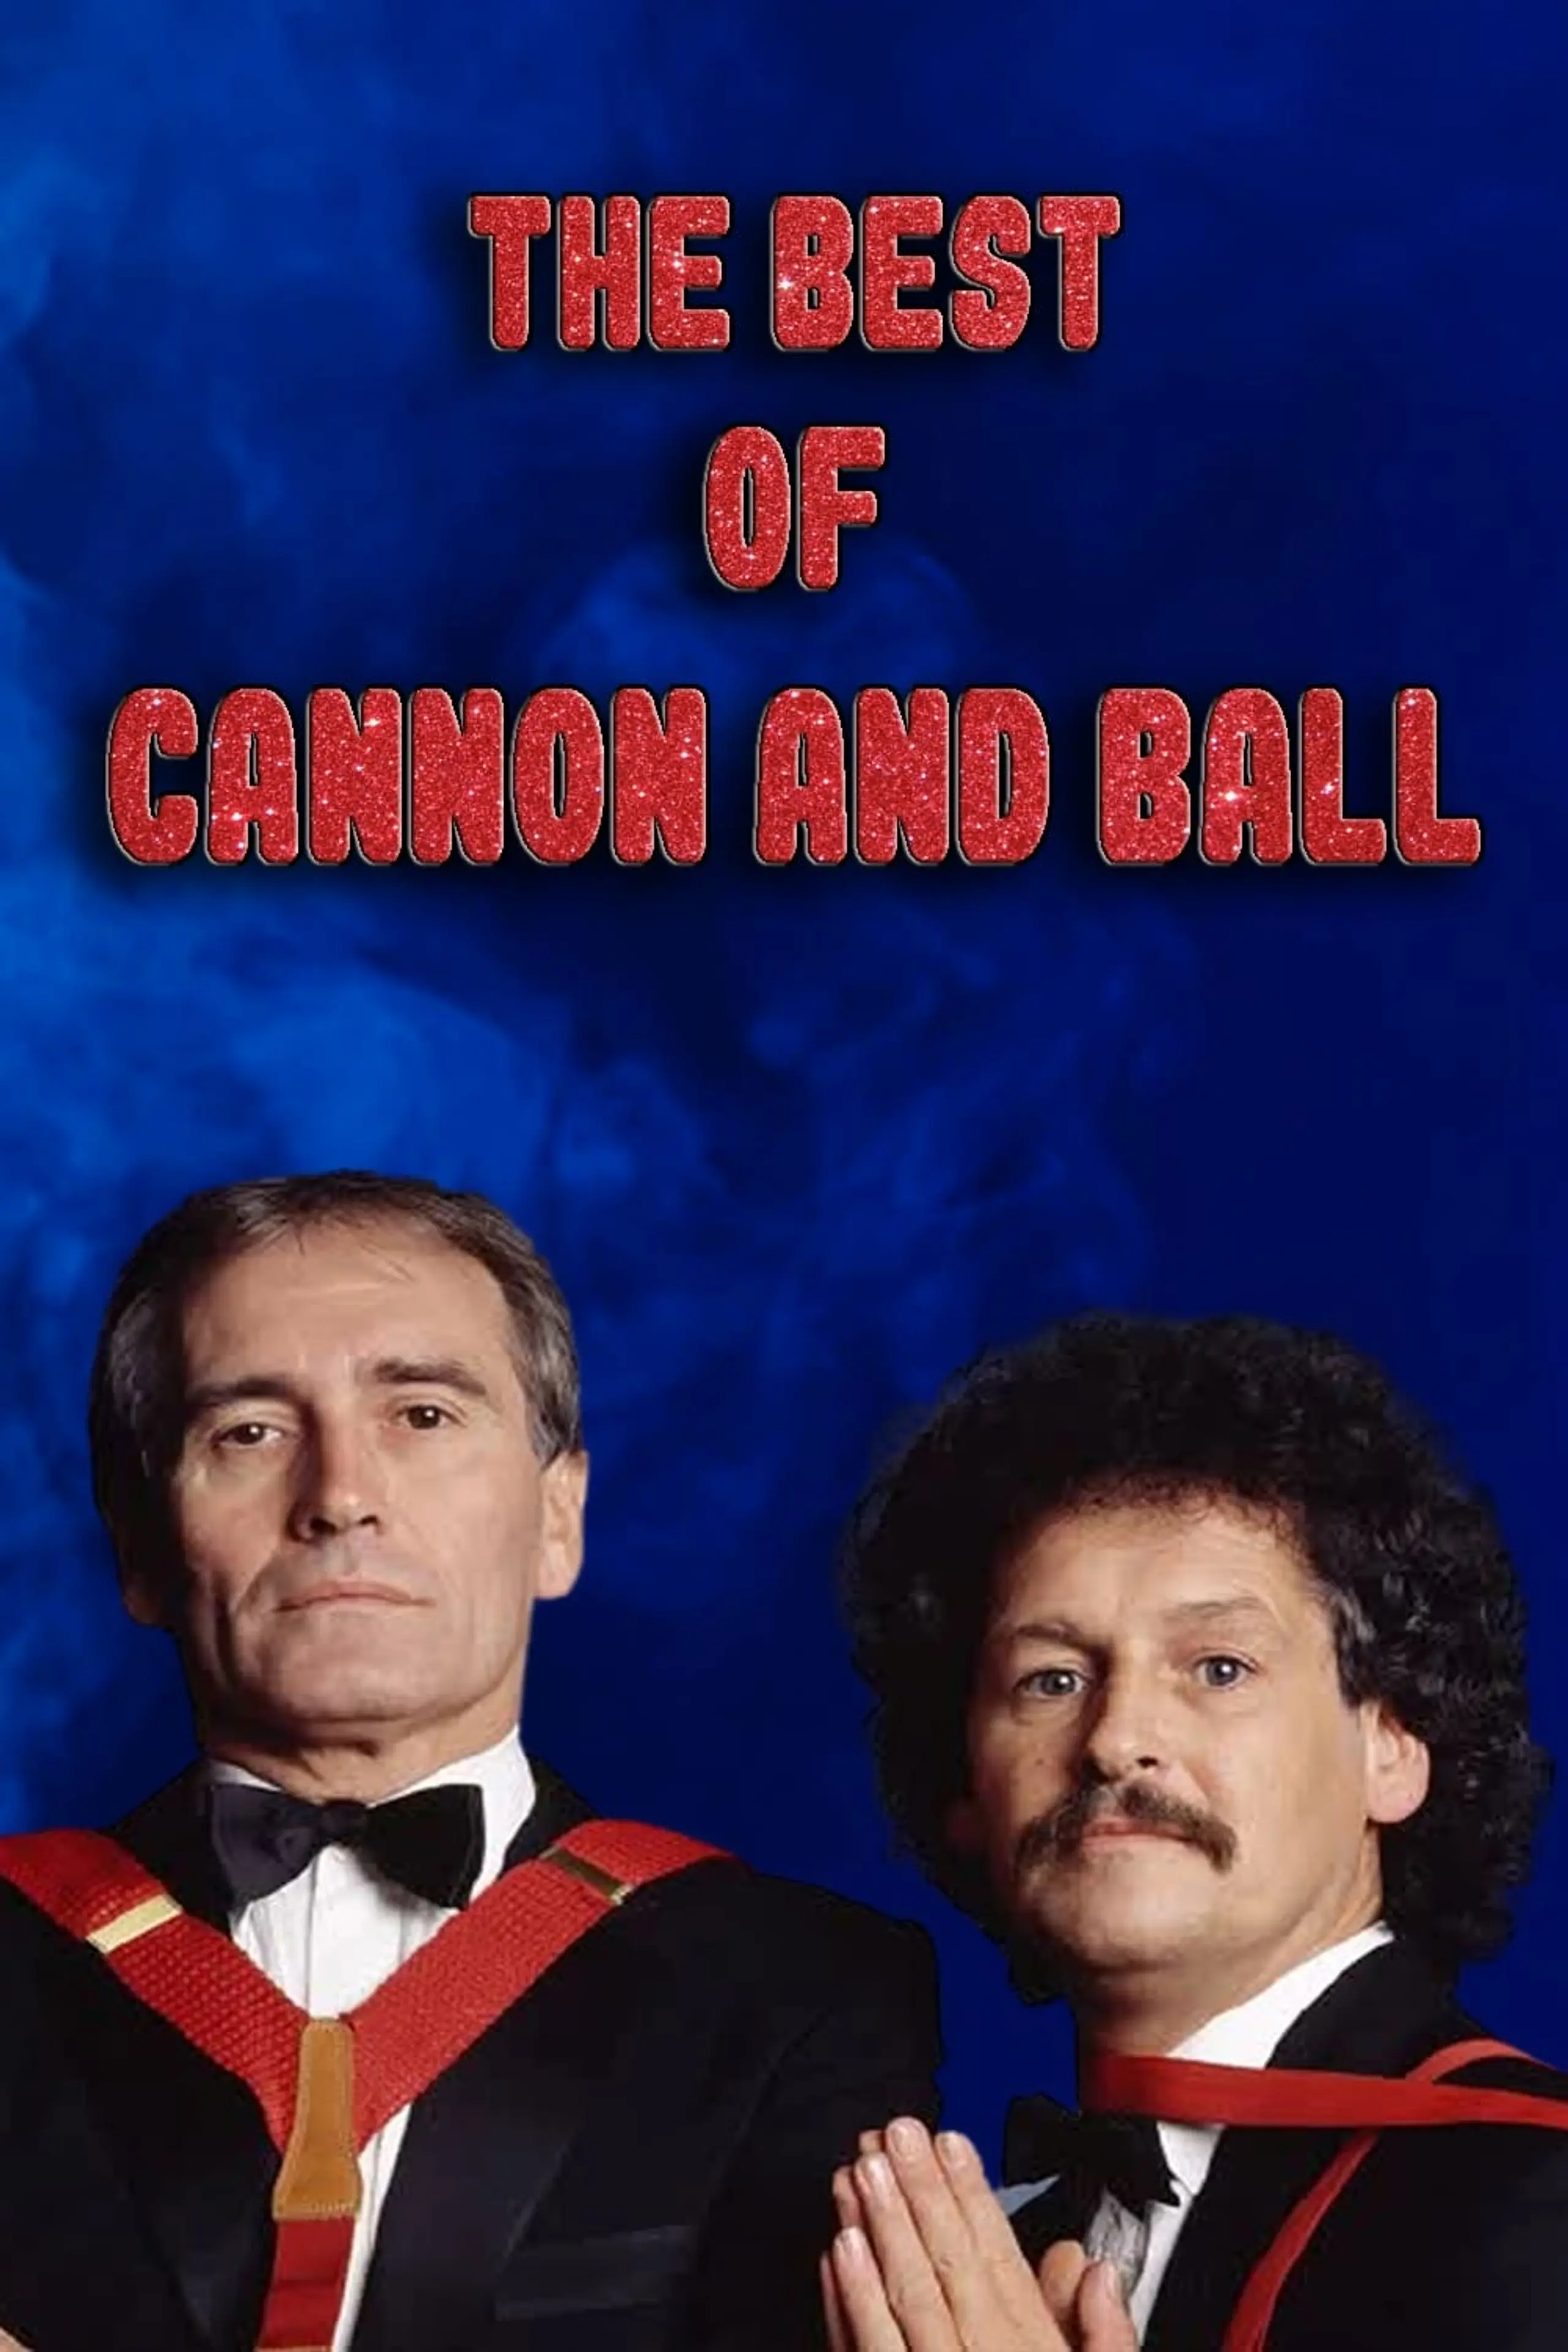 Cannon and Ball - The Best of Cannon and Ball